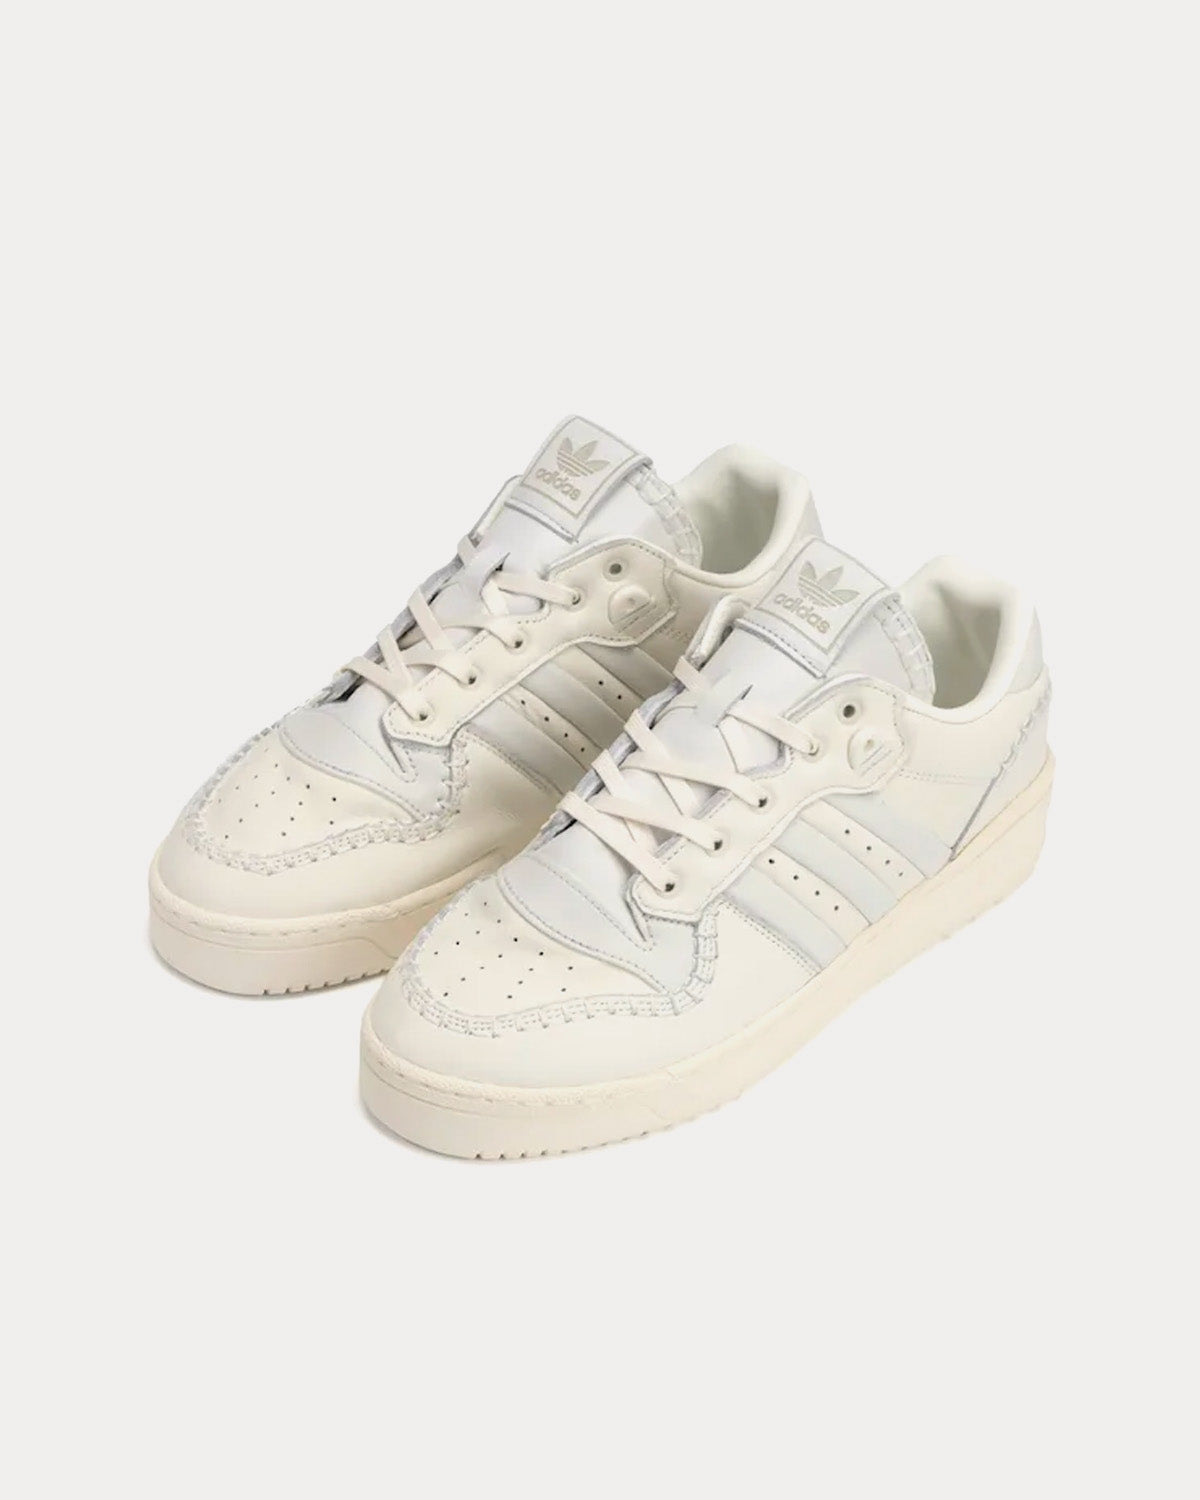 Adidas x Foot Industry - Rivalry White Low Top Sneakers